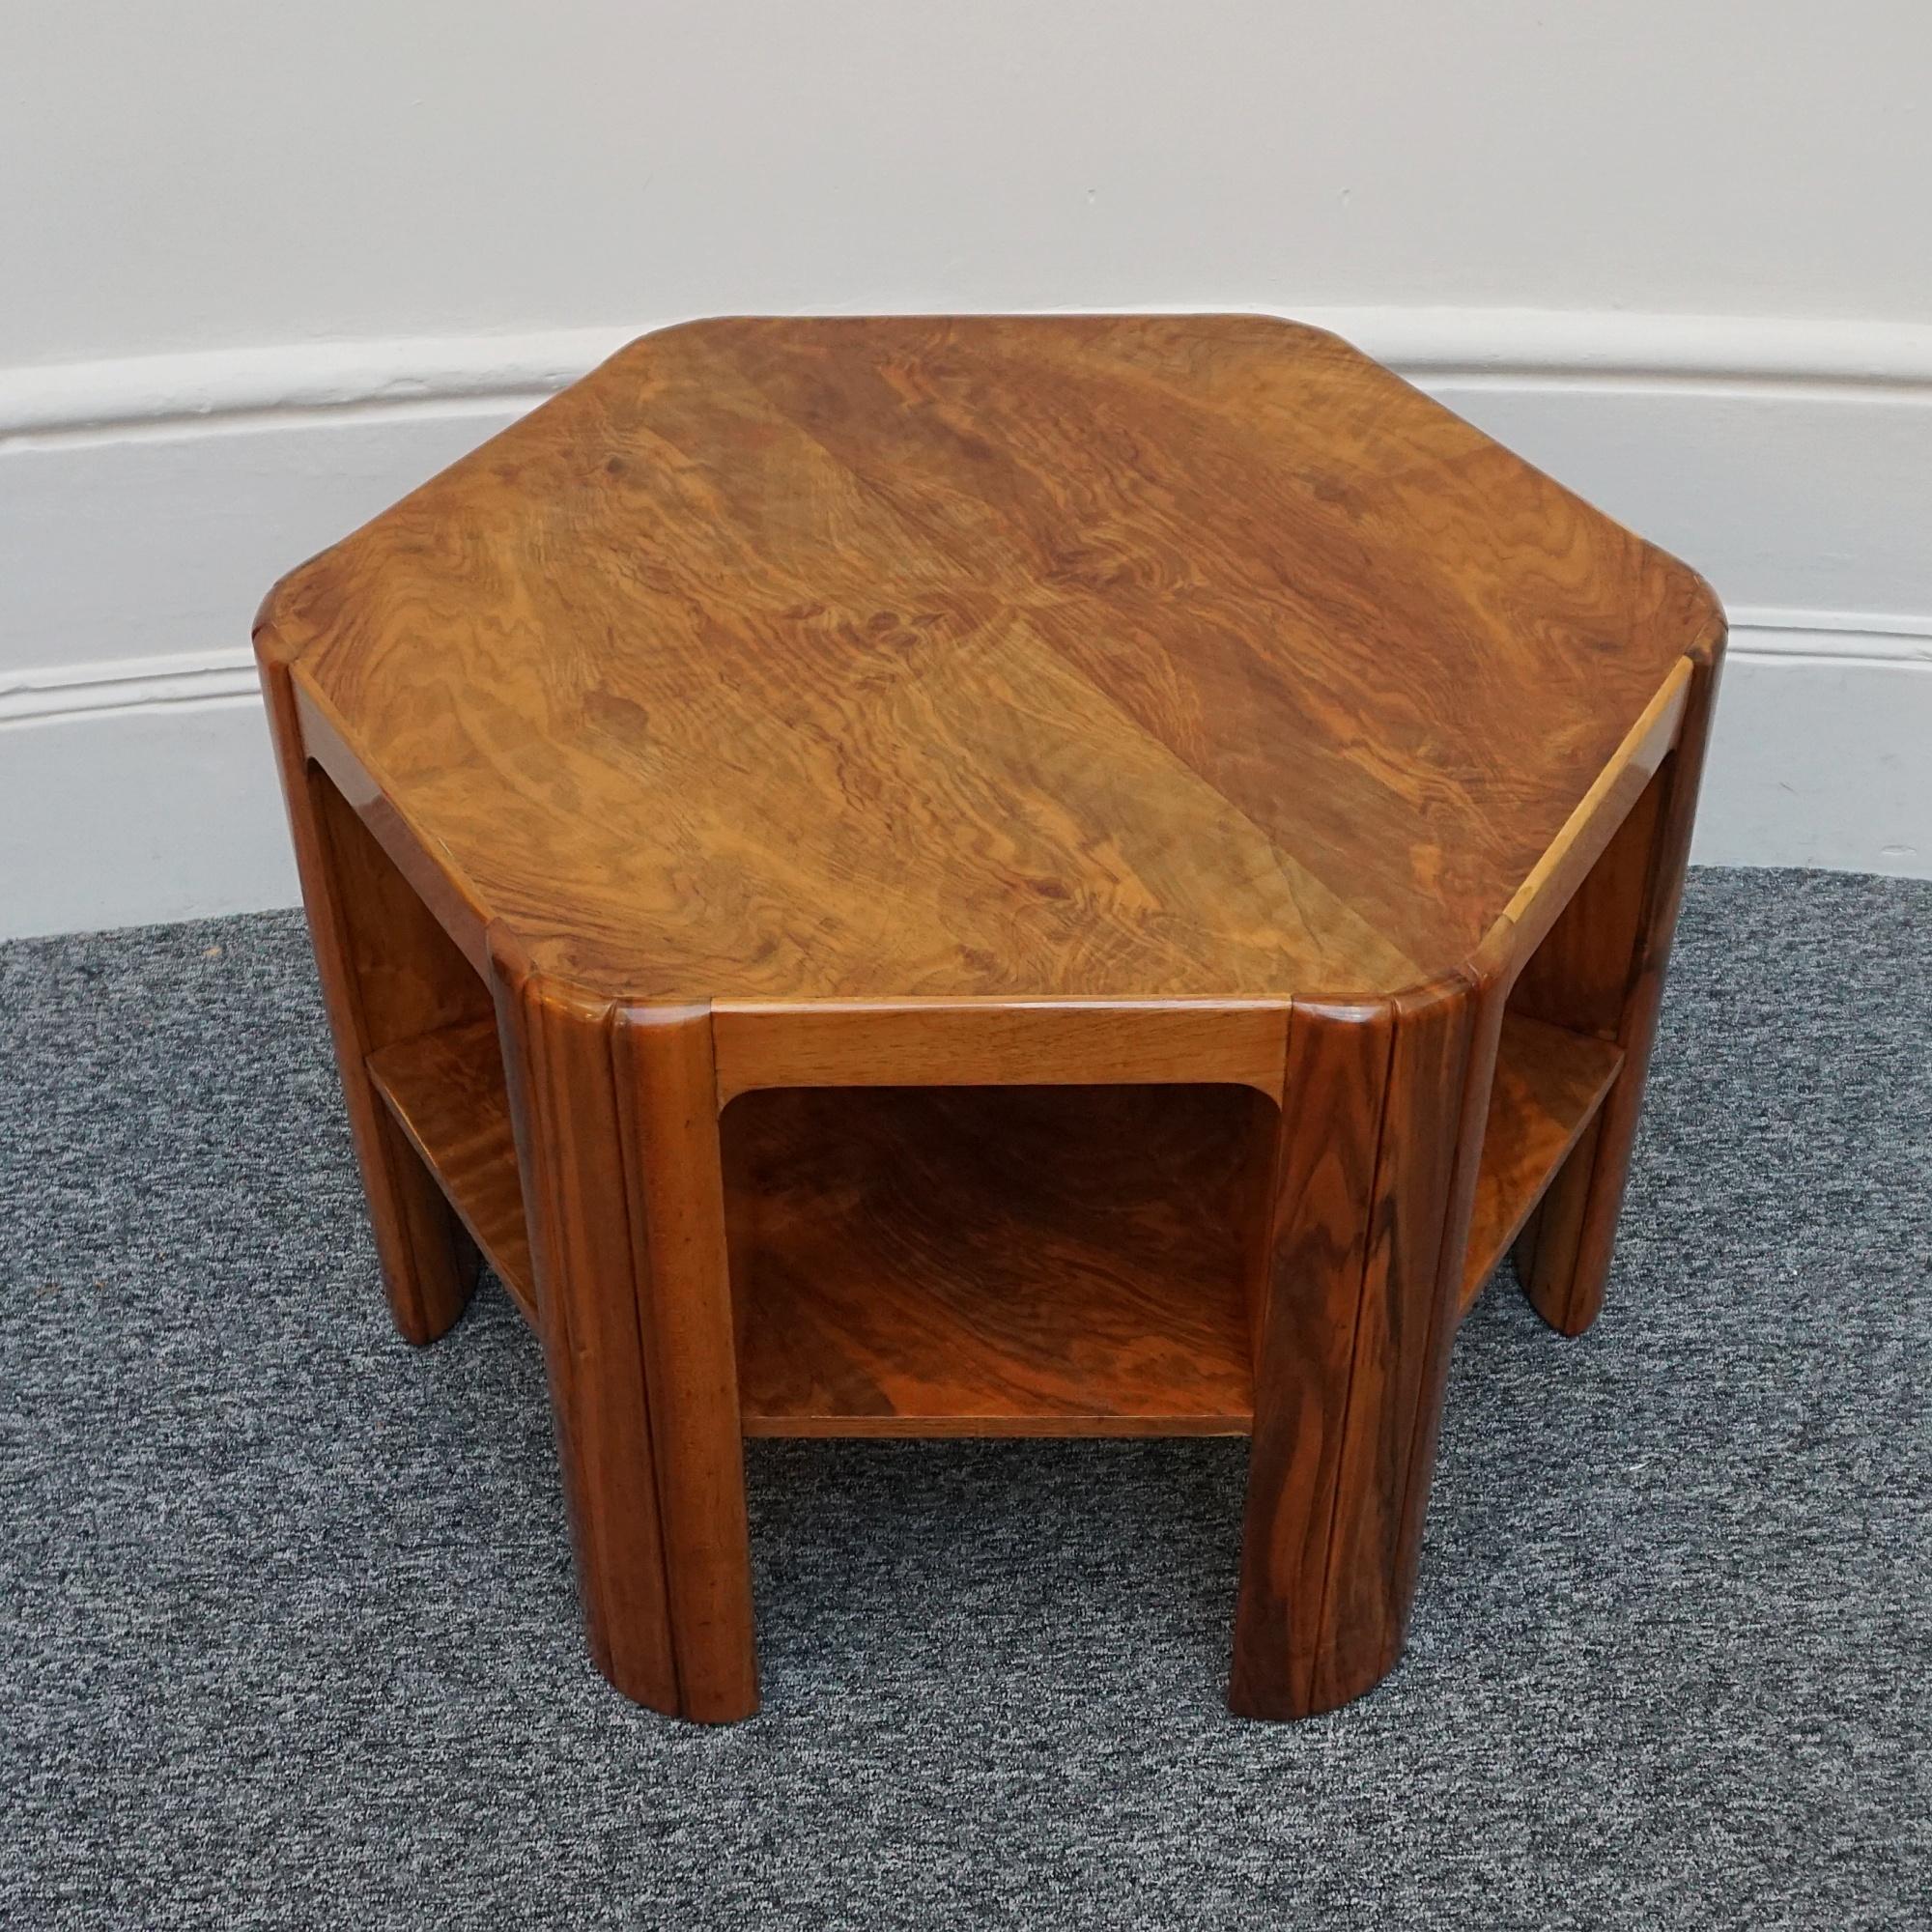 Original Art Deco Side Table by Heal's of London 2